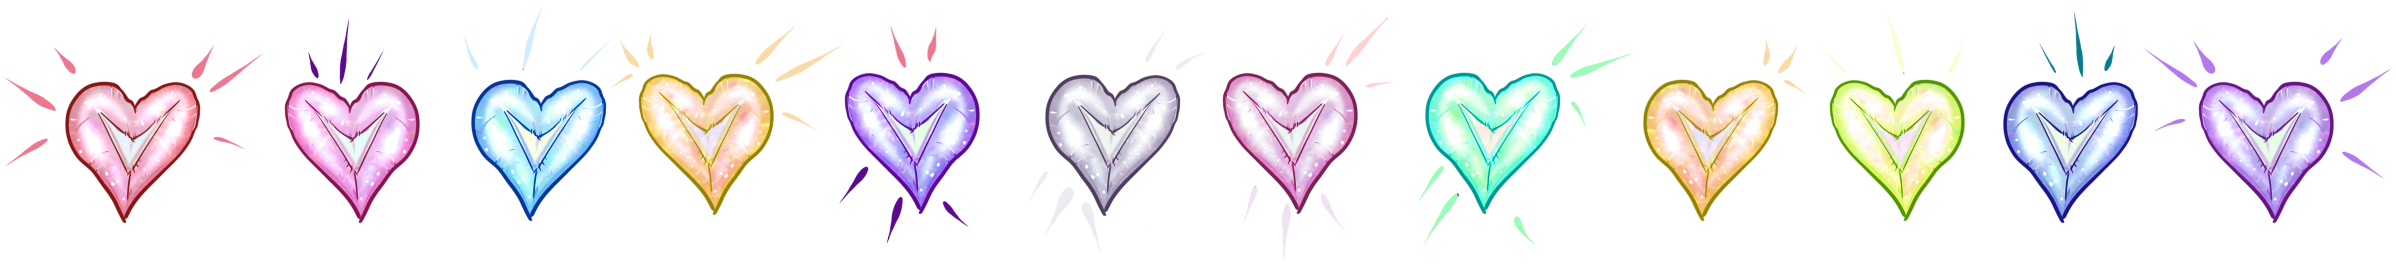 Skirentines_Event_Hearts_DIV.png